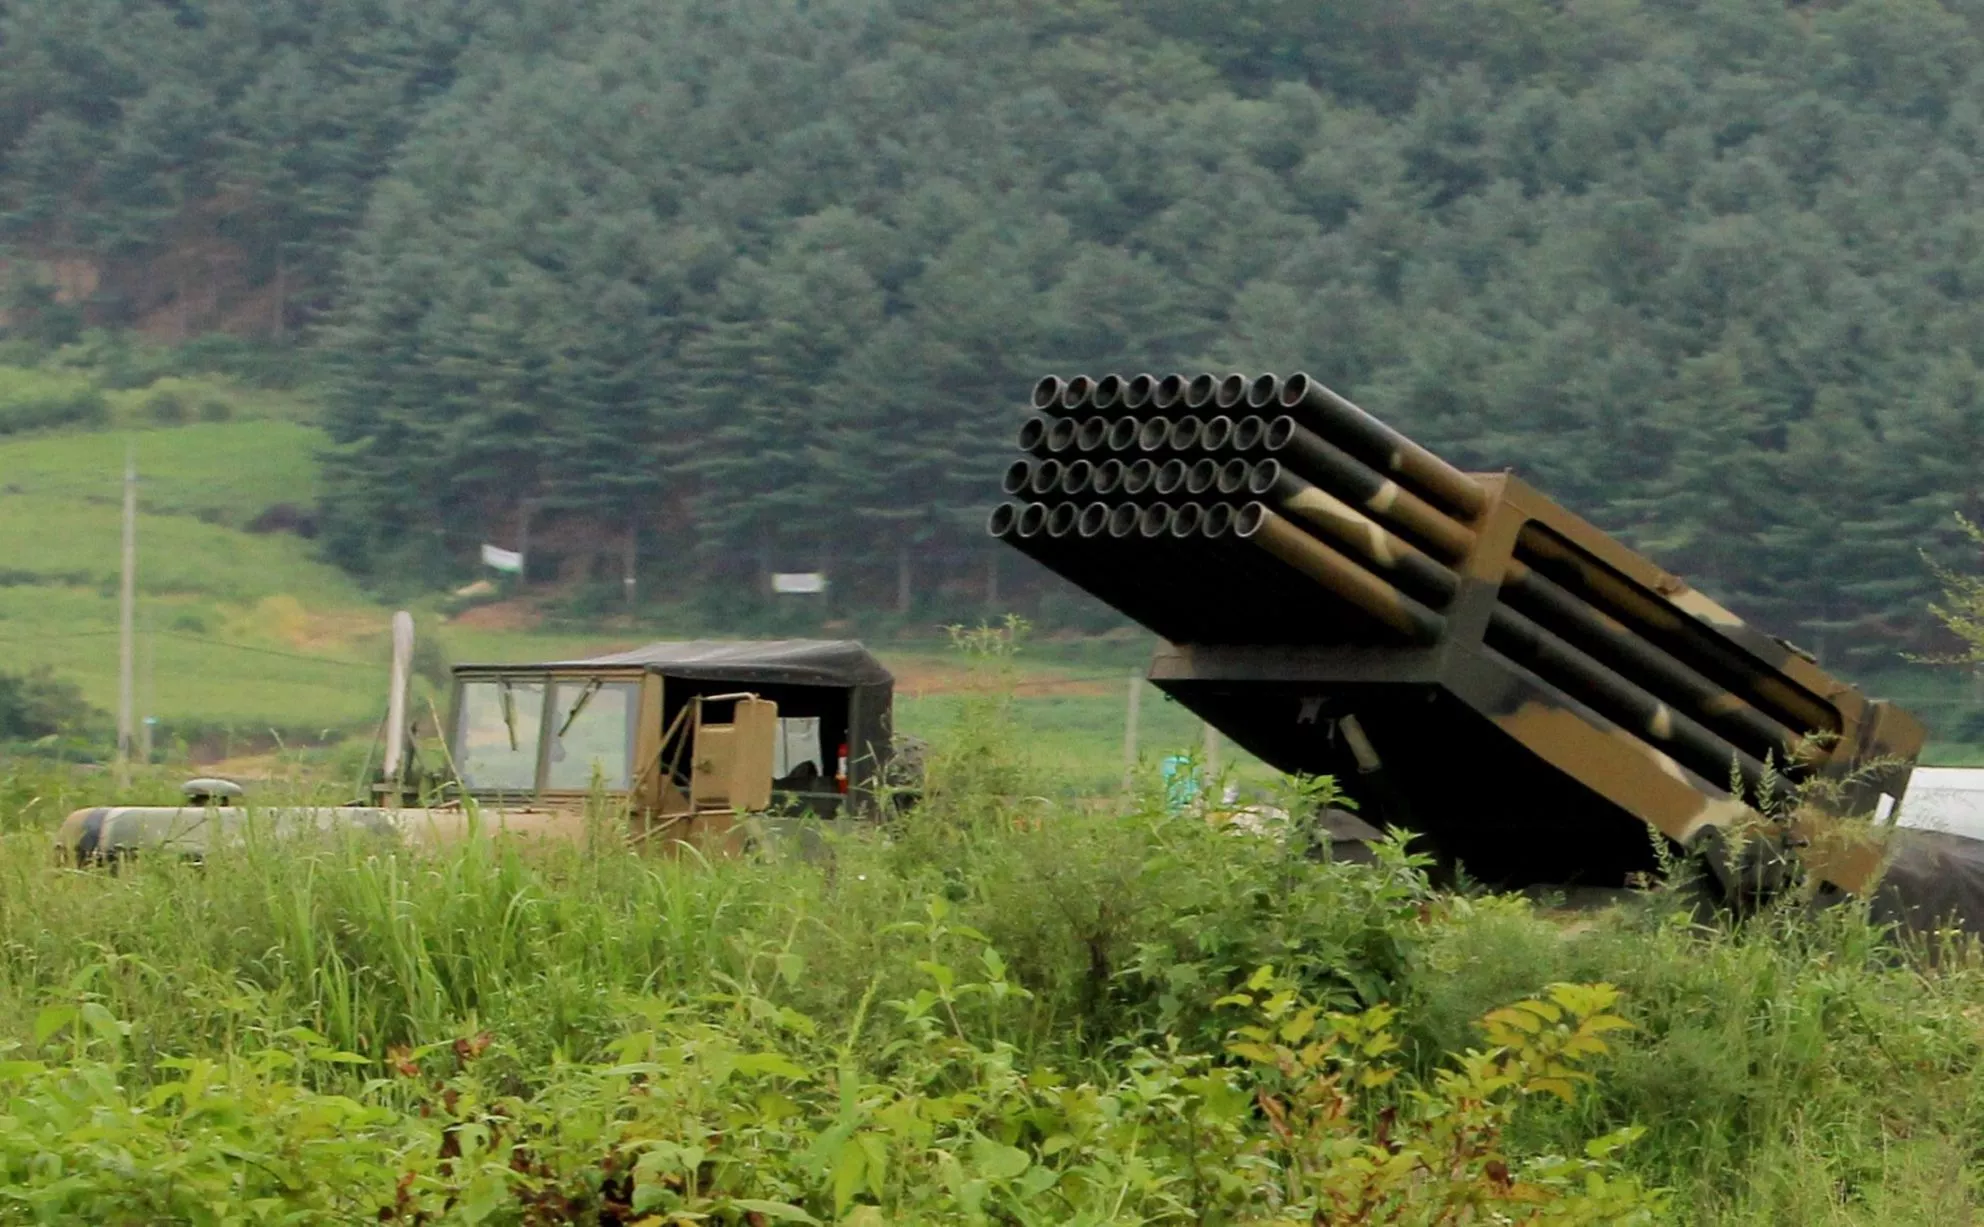 South-Koreas-military-deploy-multiple-rocket-launcher-systems-in-a-field-on-Yeoncheon.jpg